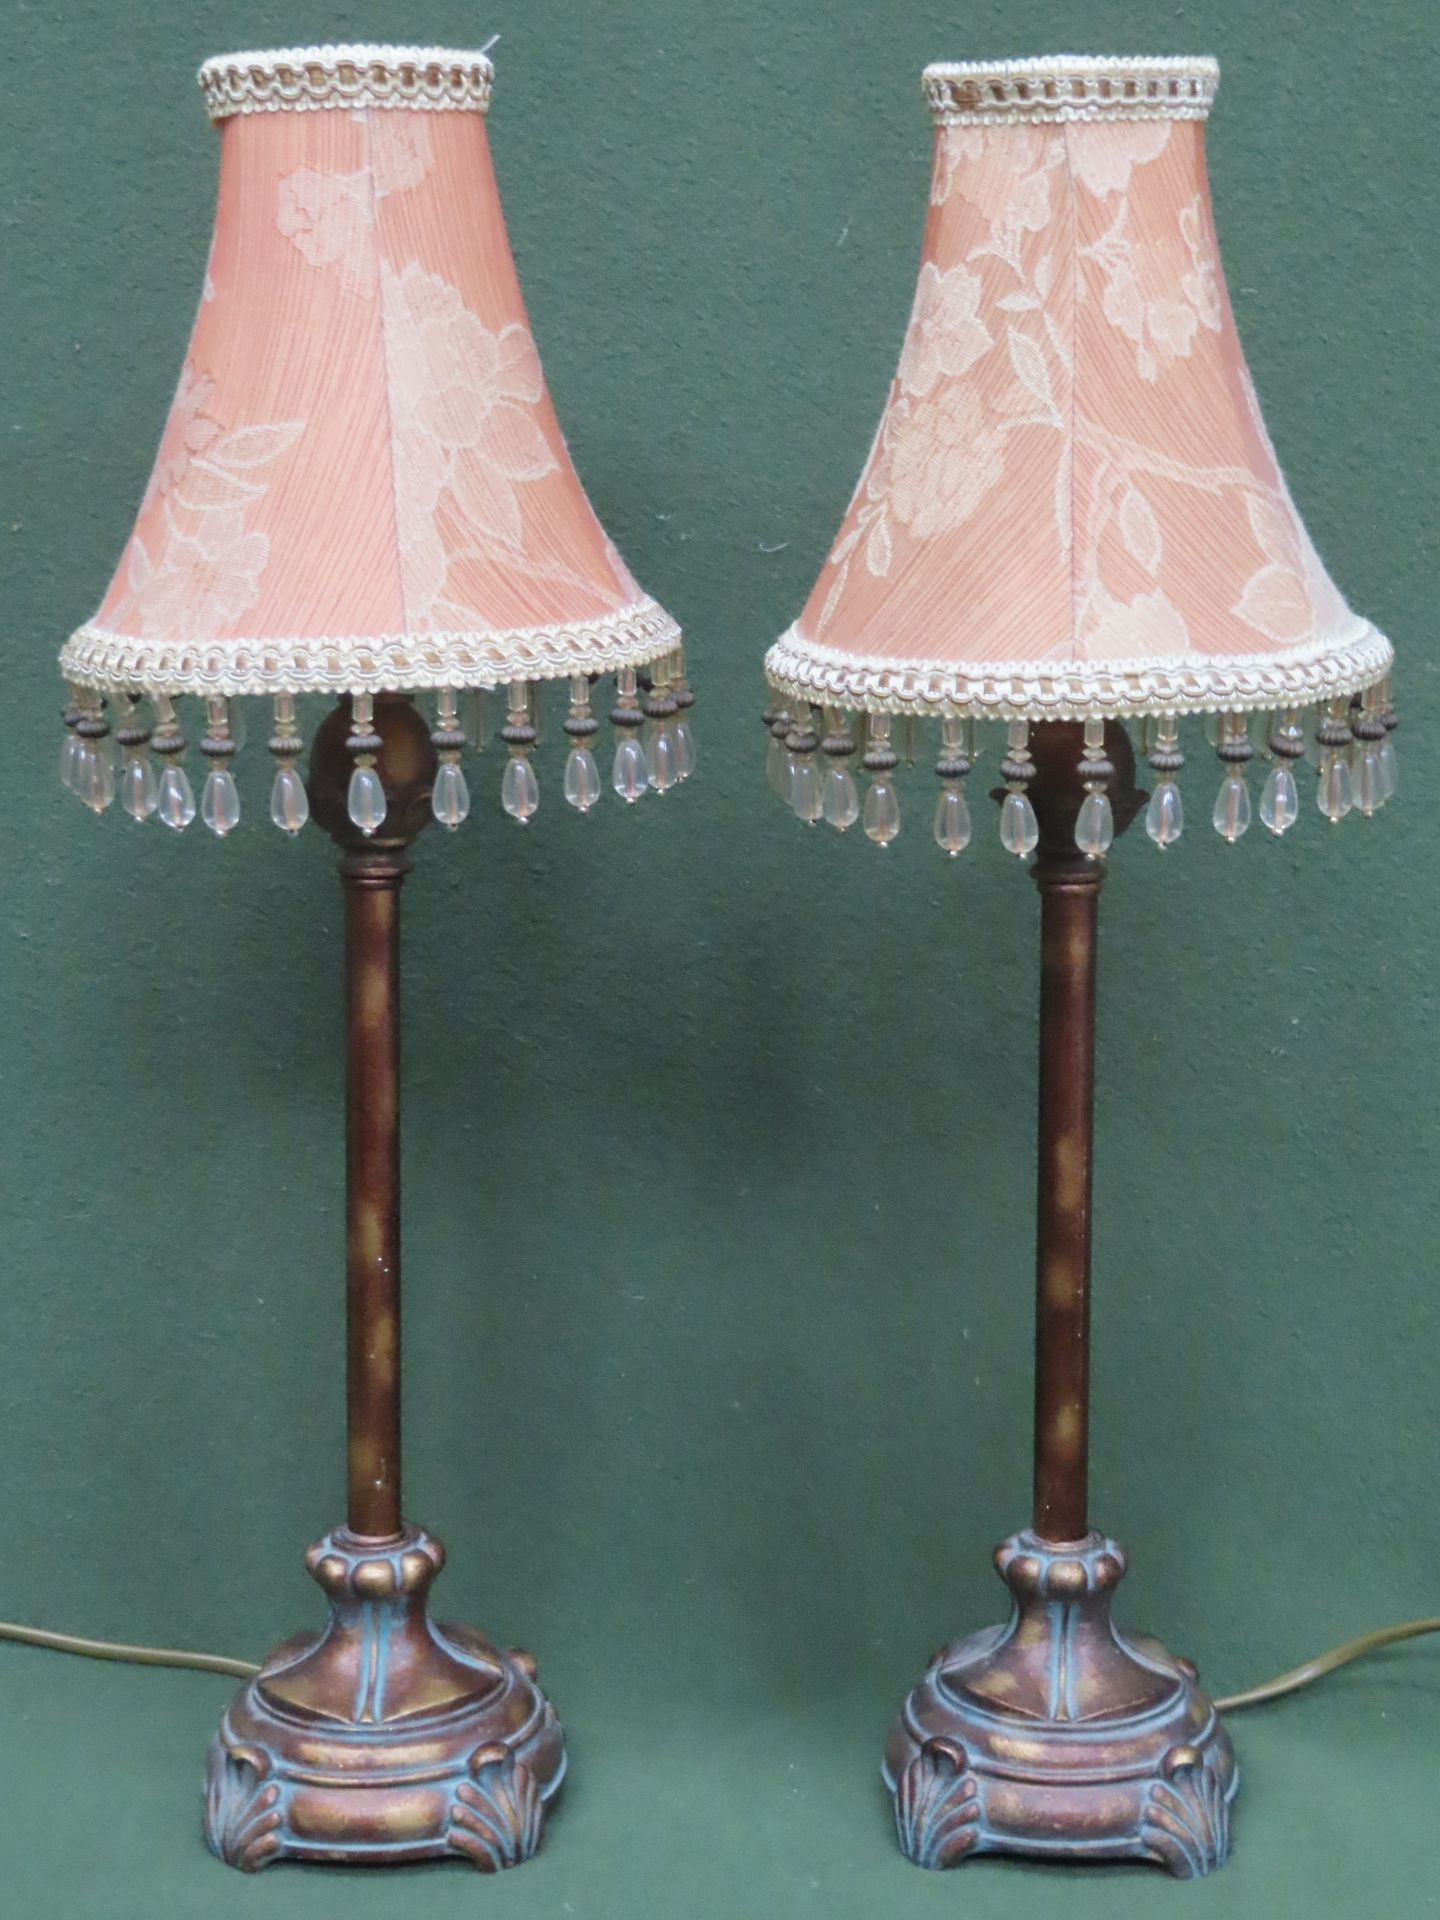 Pair of decorative bedside table lamps, with shades. Approx. 52cms H reasonable used condition